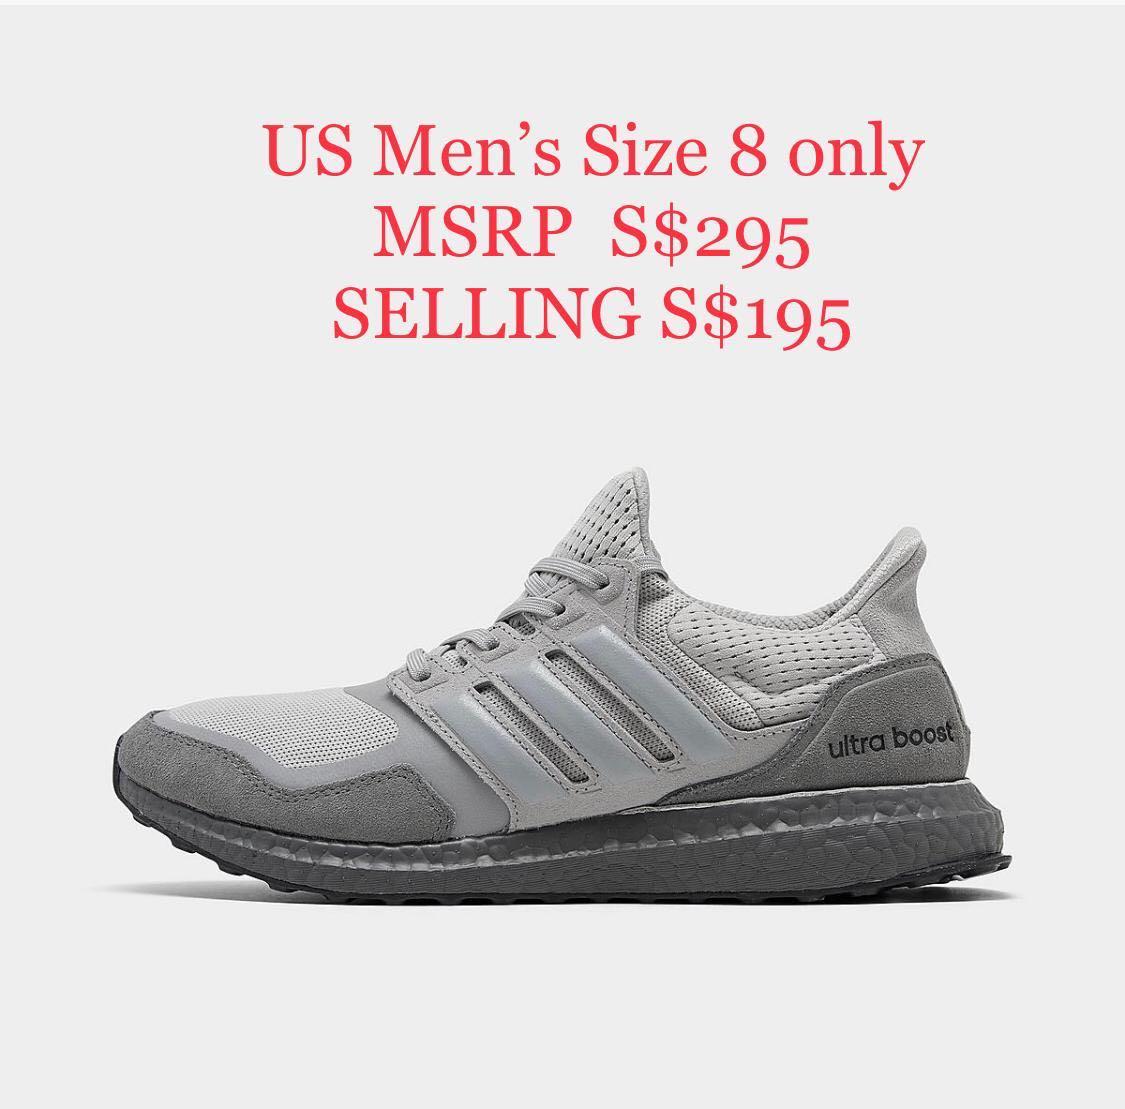 adidas shoes for men near me